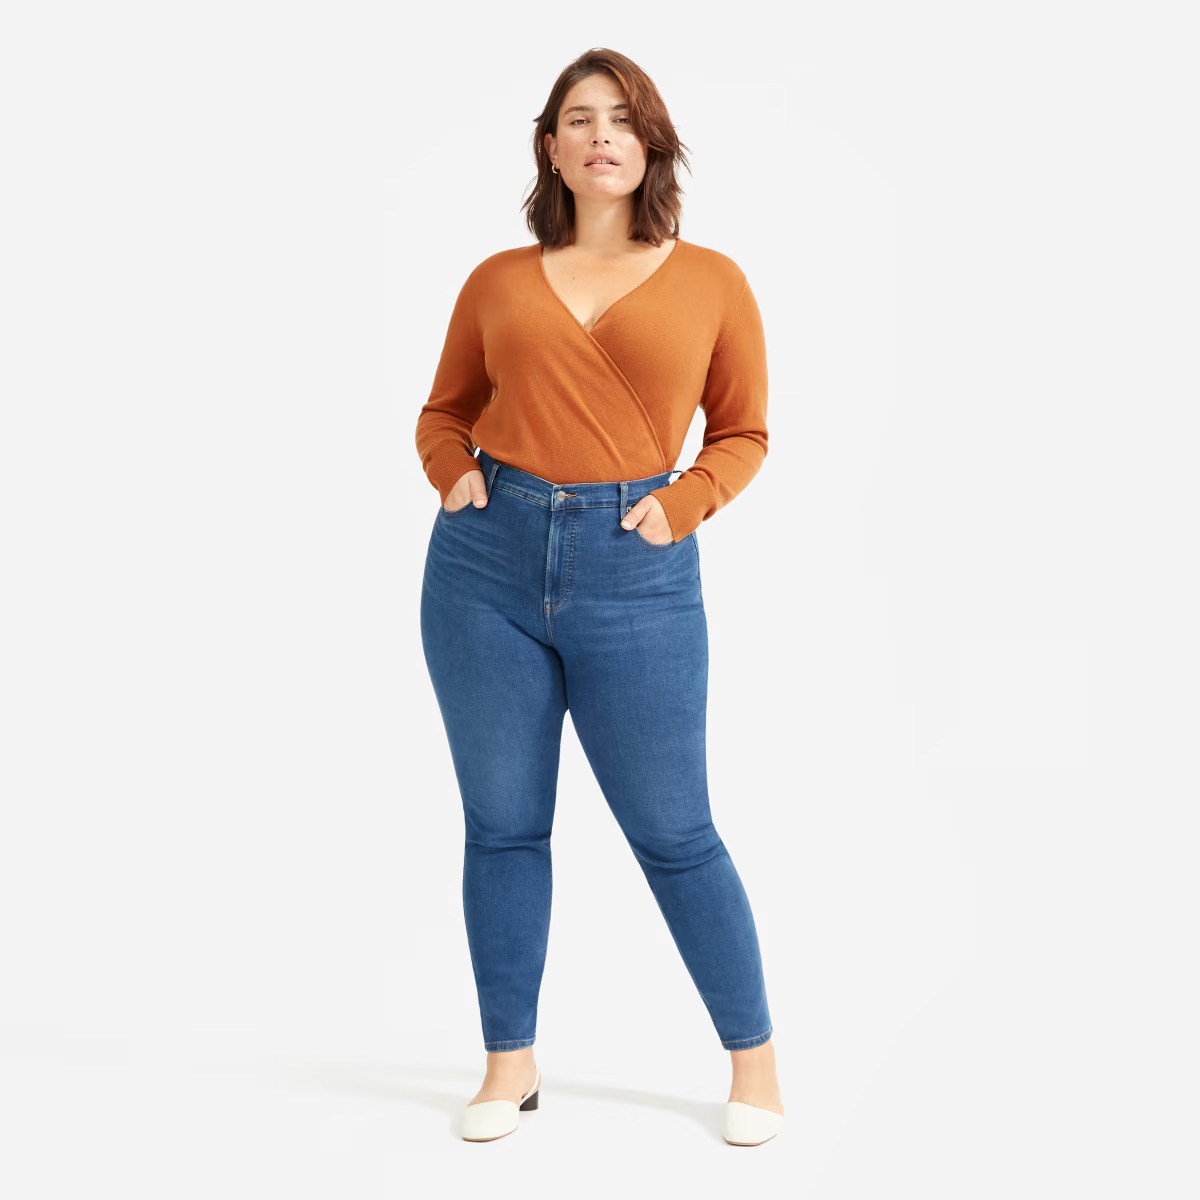 Everlane Authentic Sketch High Rise Skinny